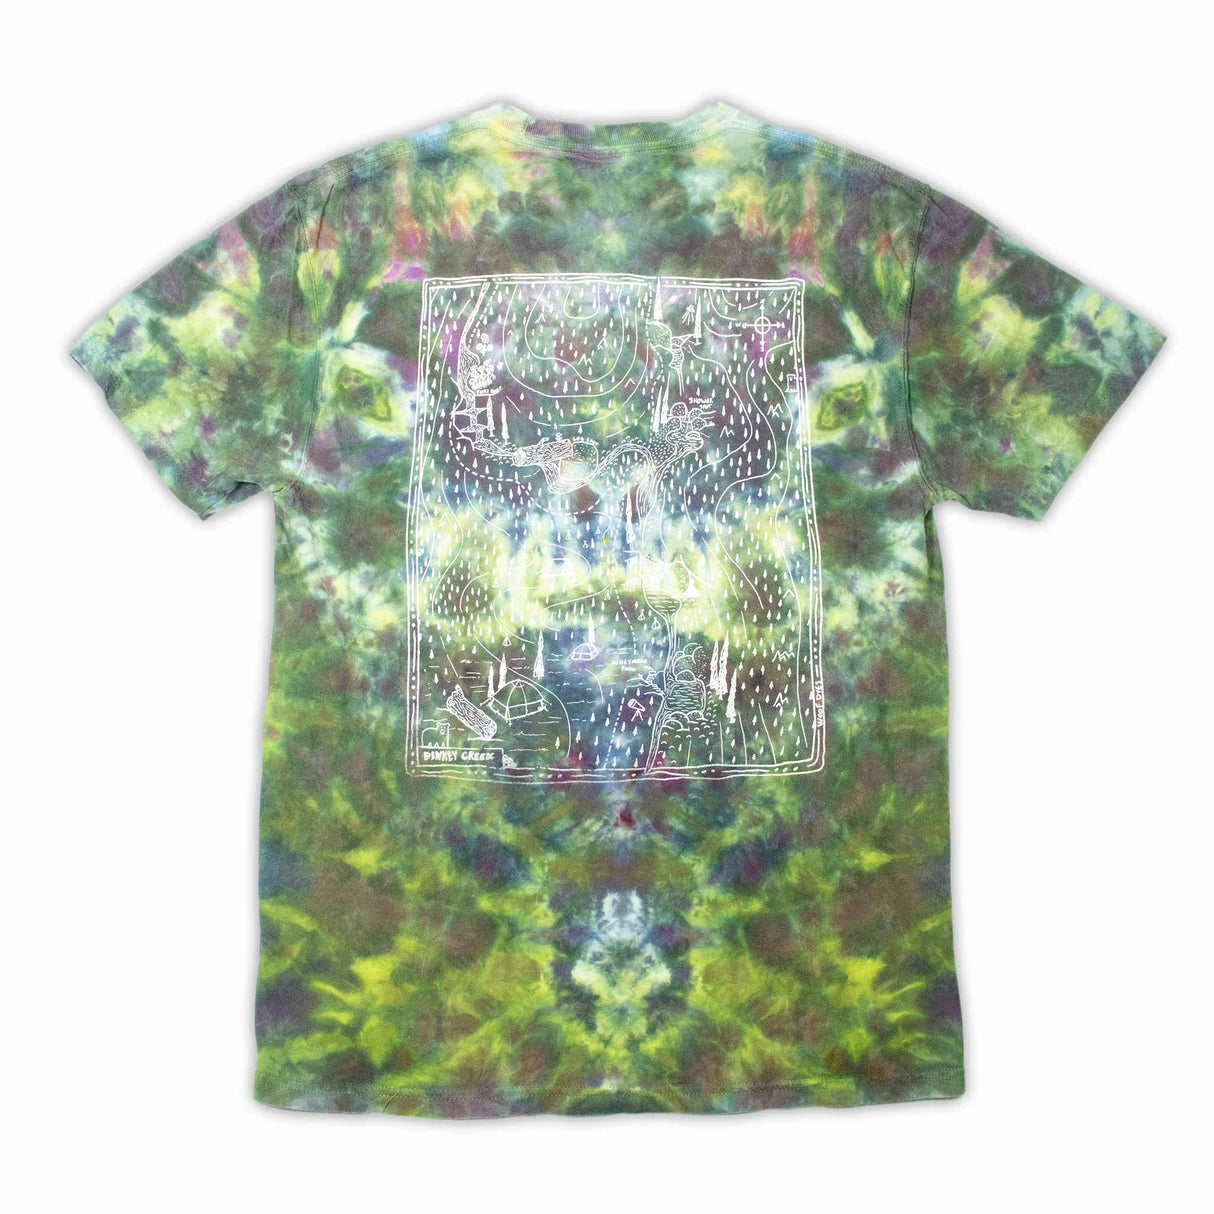 The 'Dinkey Creek' logo is subtly placed on a t-shirt with a mottled ice dye pattern in shades of green and purple, mimicking the natural variations of foliage. Features a unique 'Dinkey Creek' screen print design.